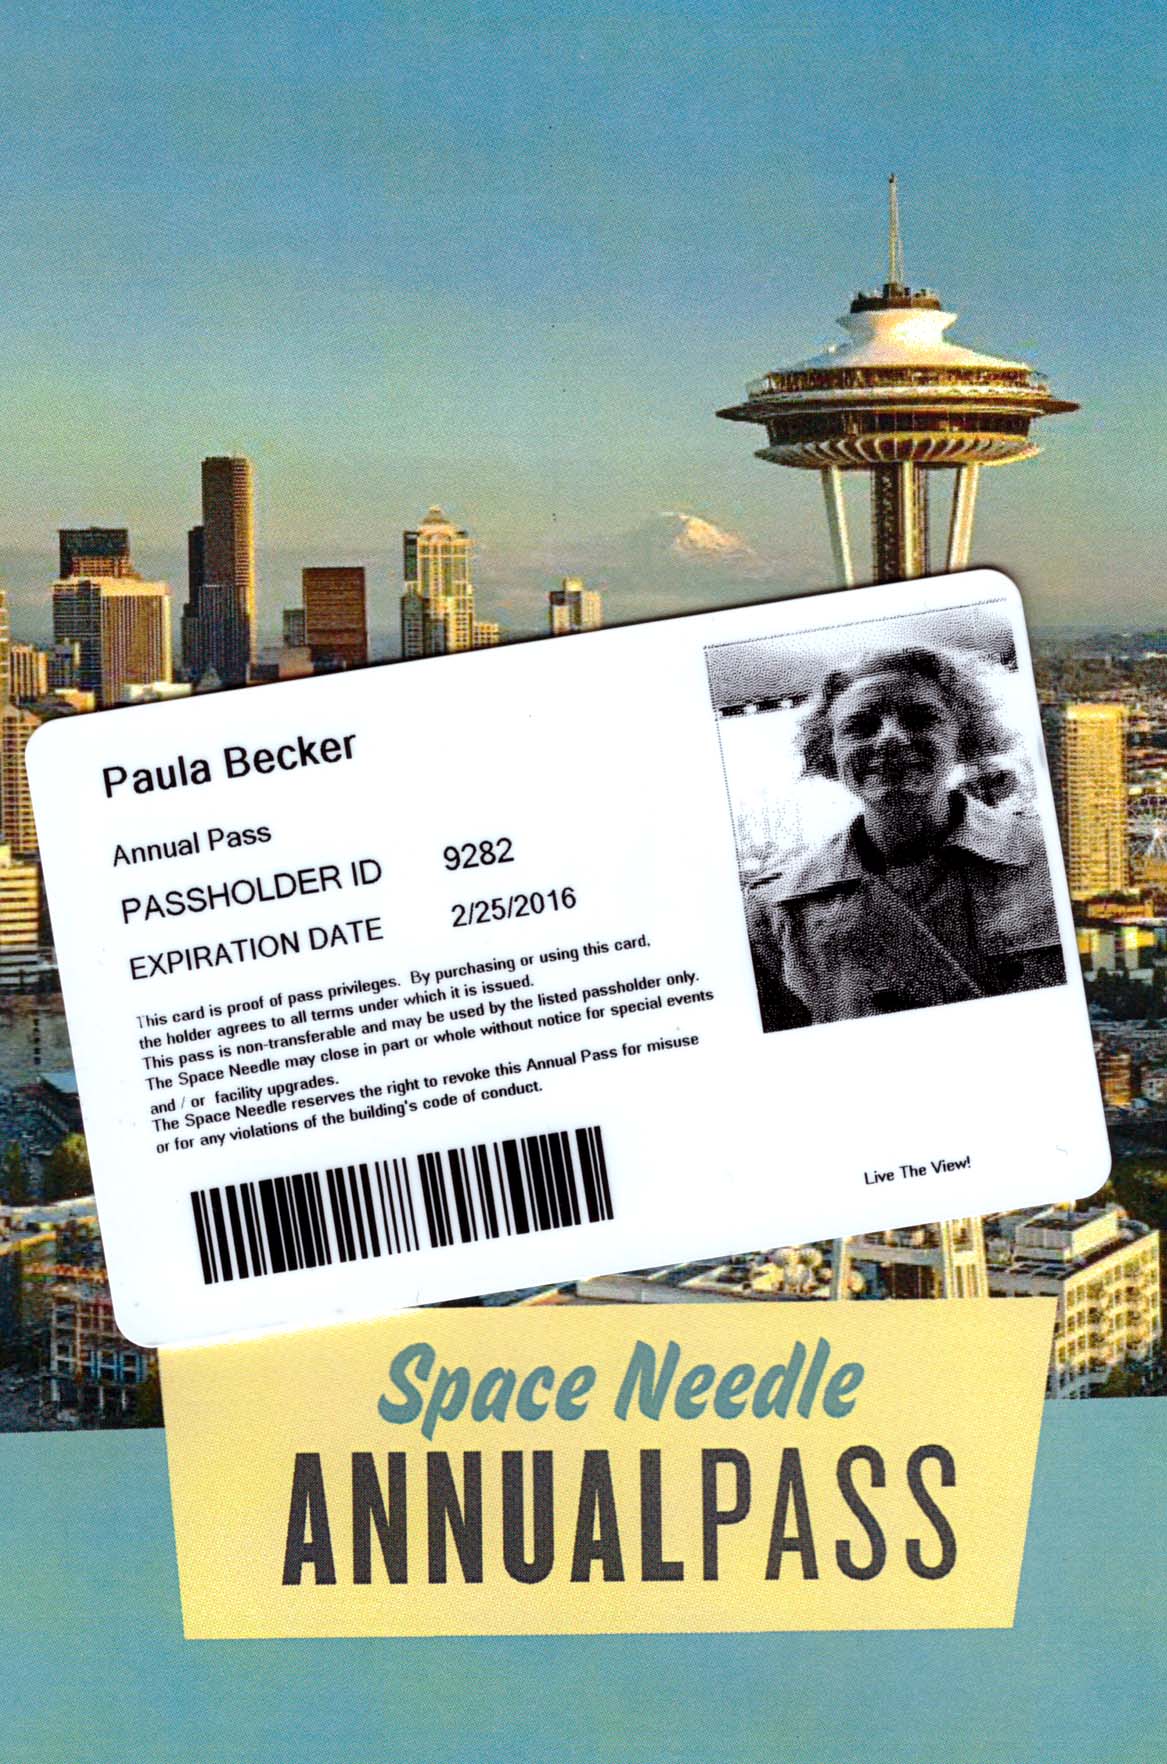 See you at the Space Needle!